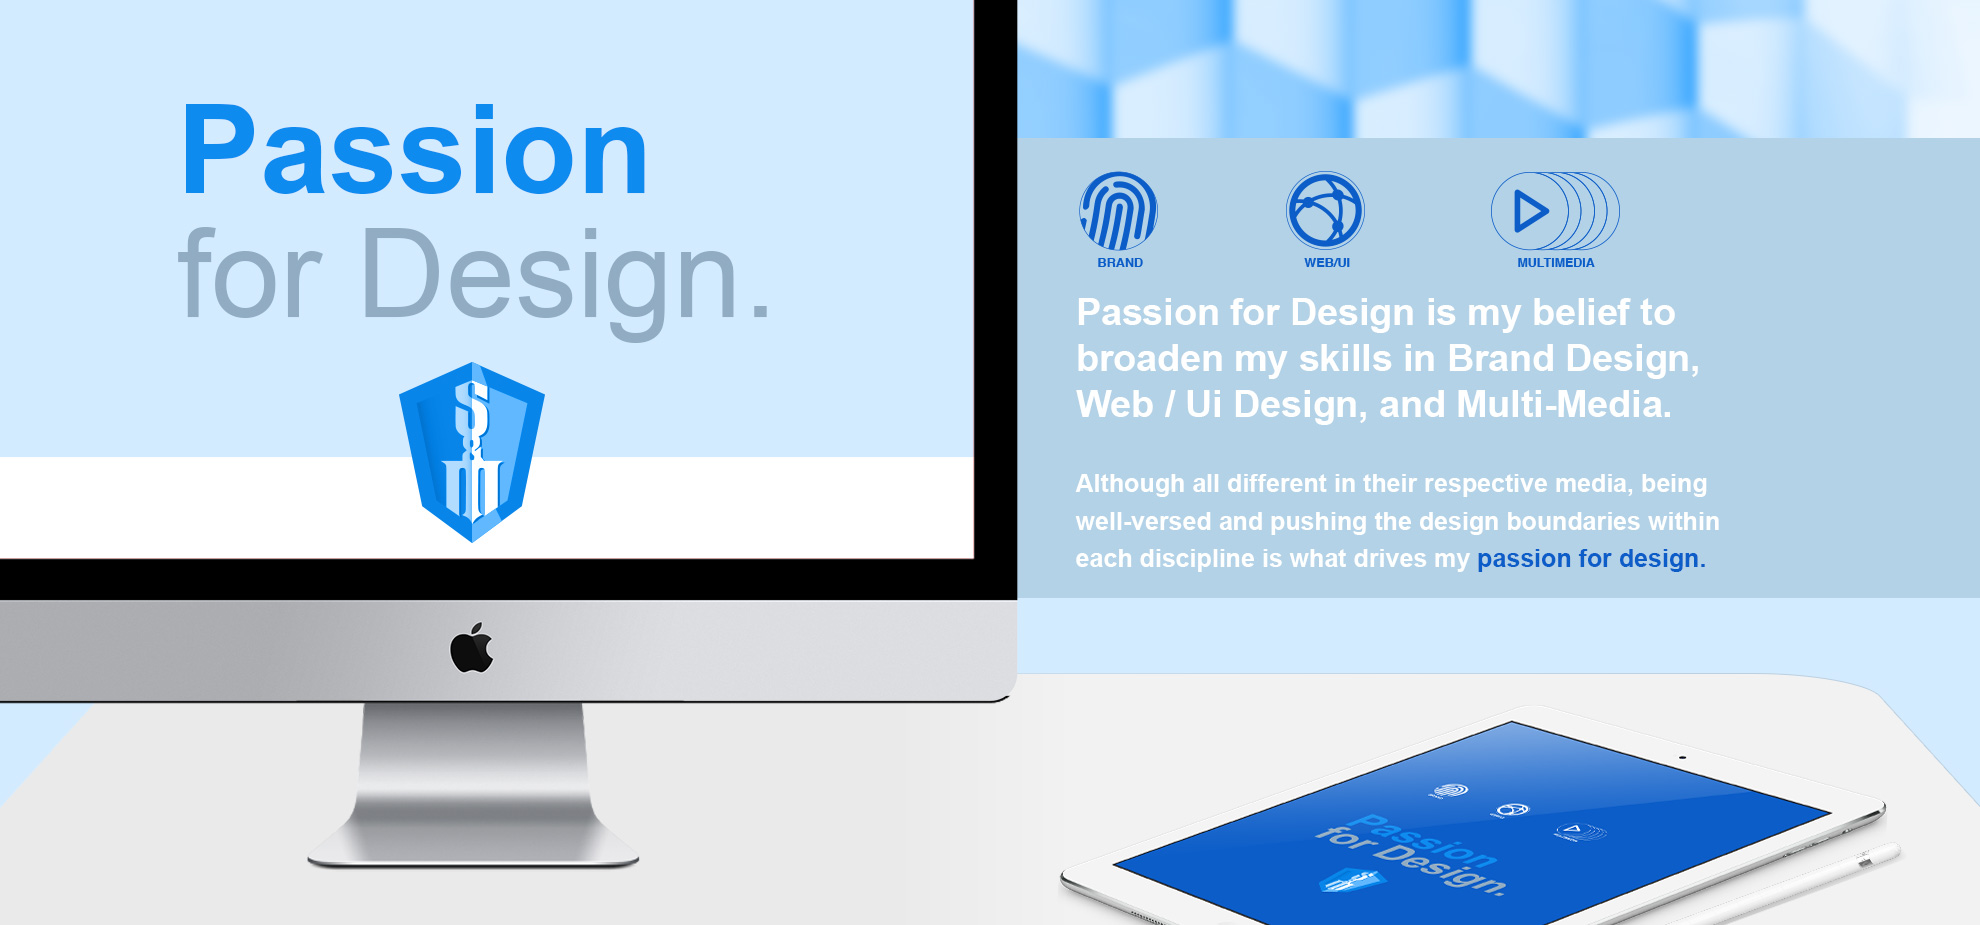 sherwin-passion for design-2